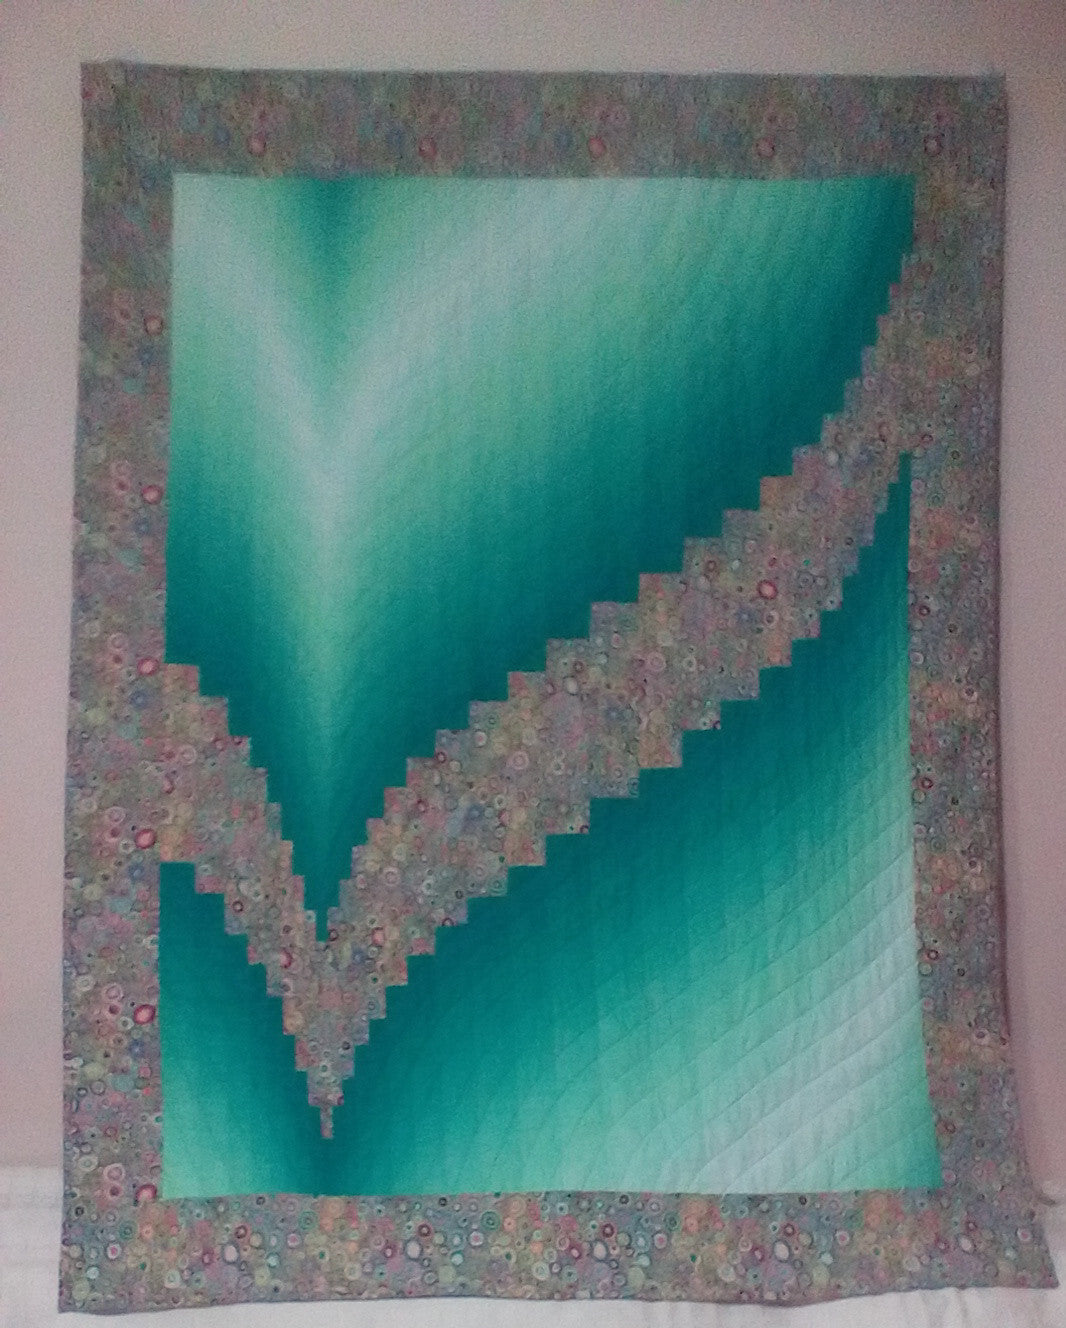 Two Fabric Bargello Class Quilt at Cary Quilting